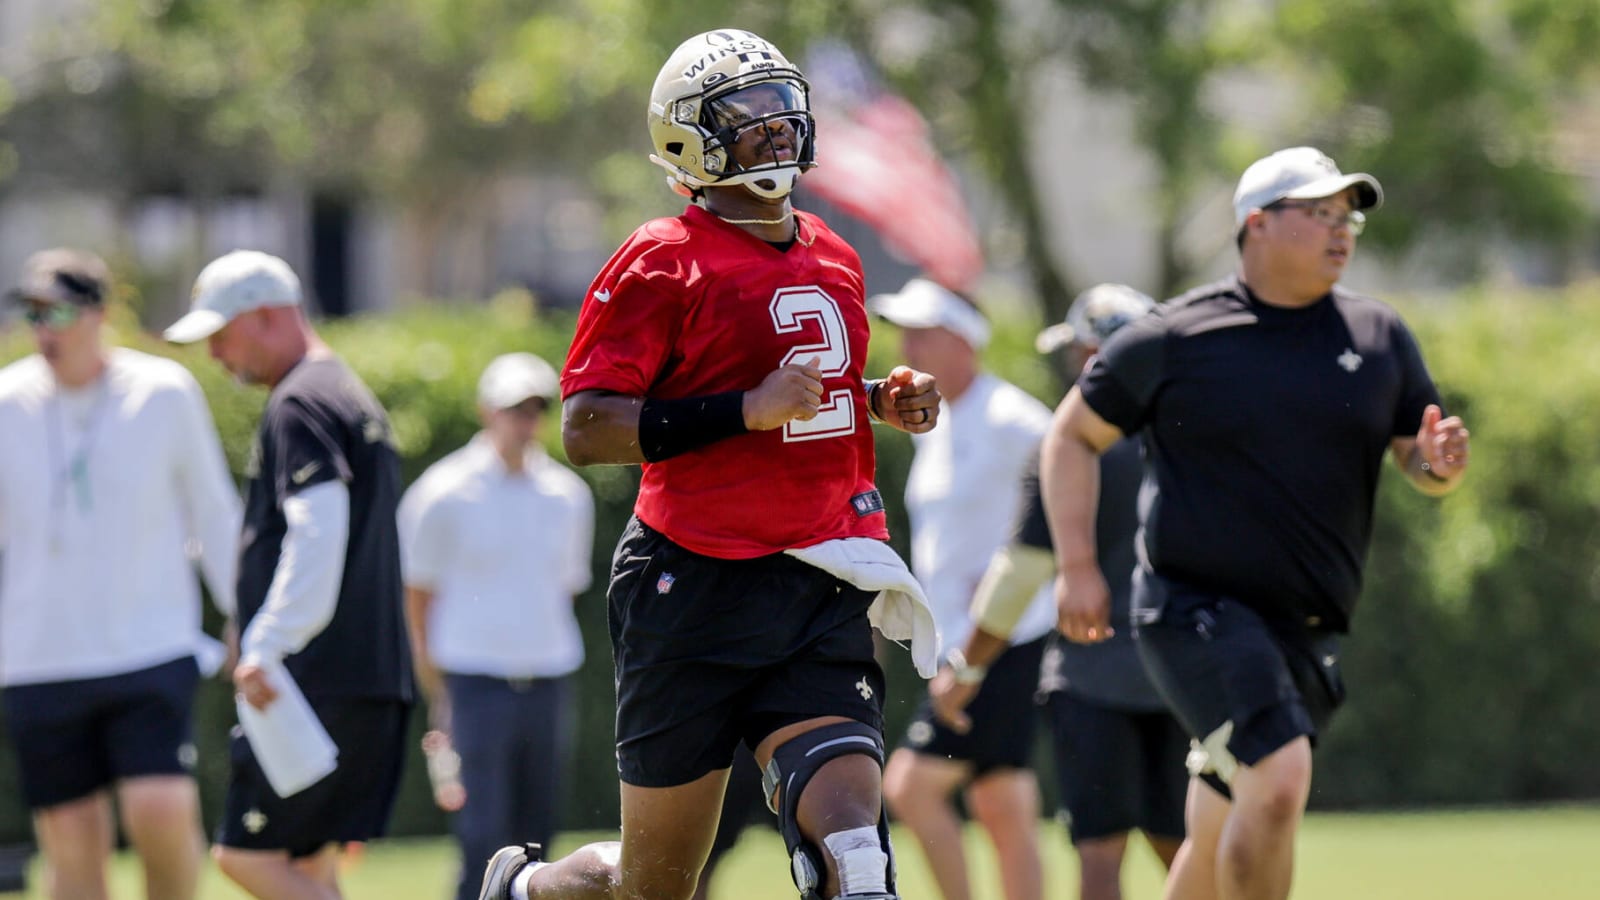 Jameis Winston ditches brace on surgically repaired knee